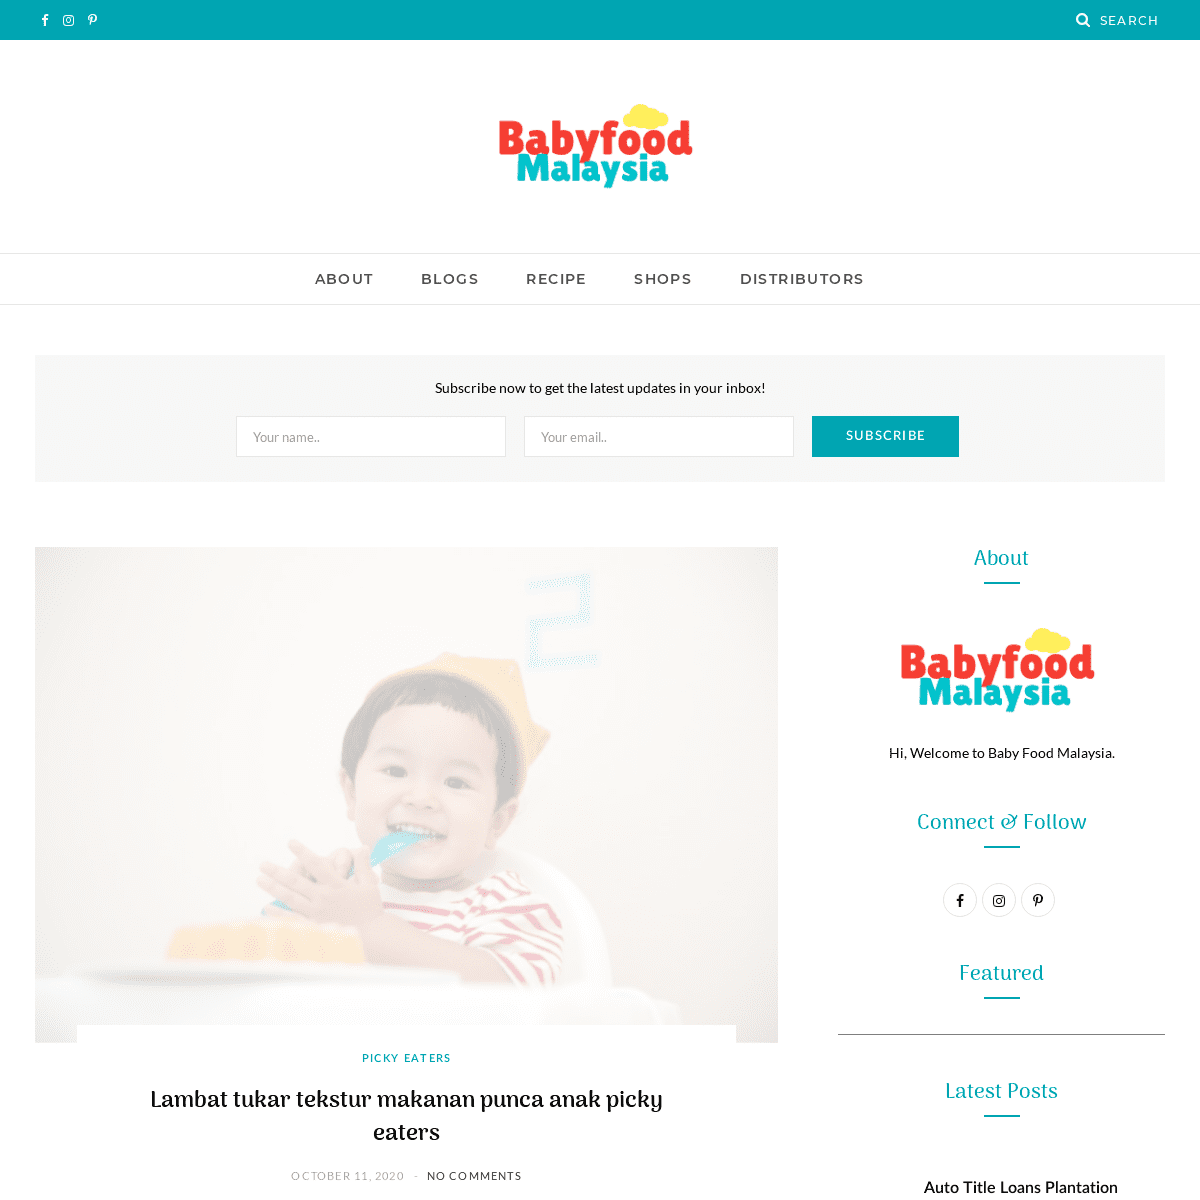 A complete backup of https://makananbaby.com